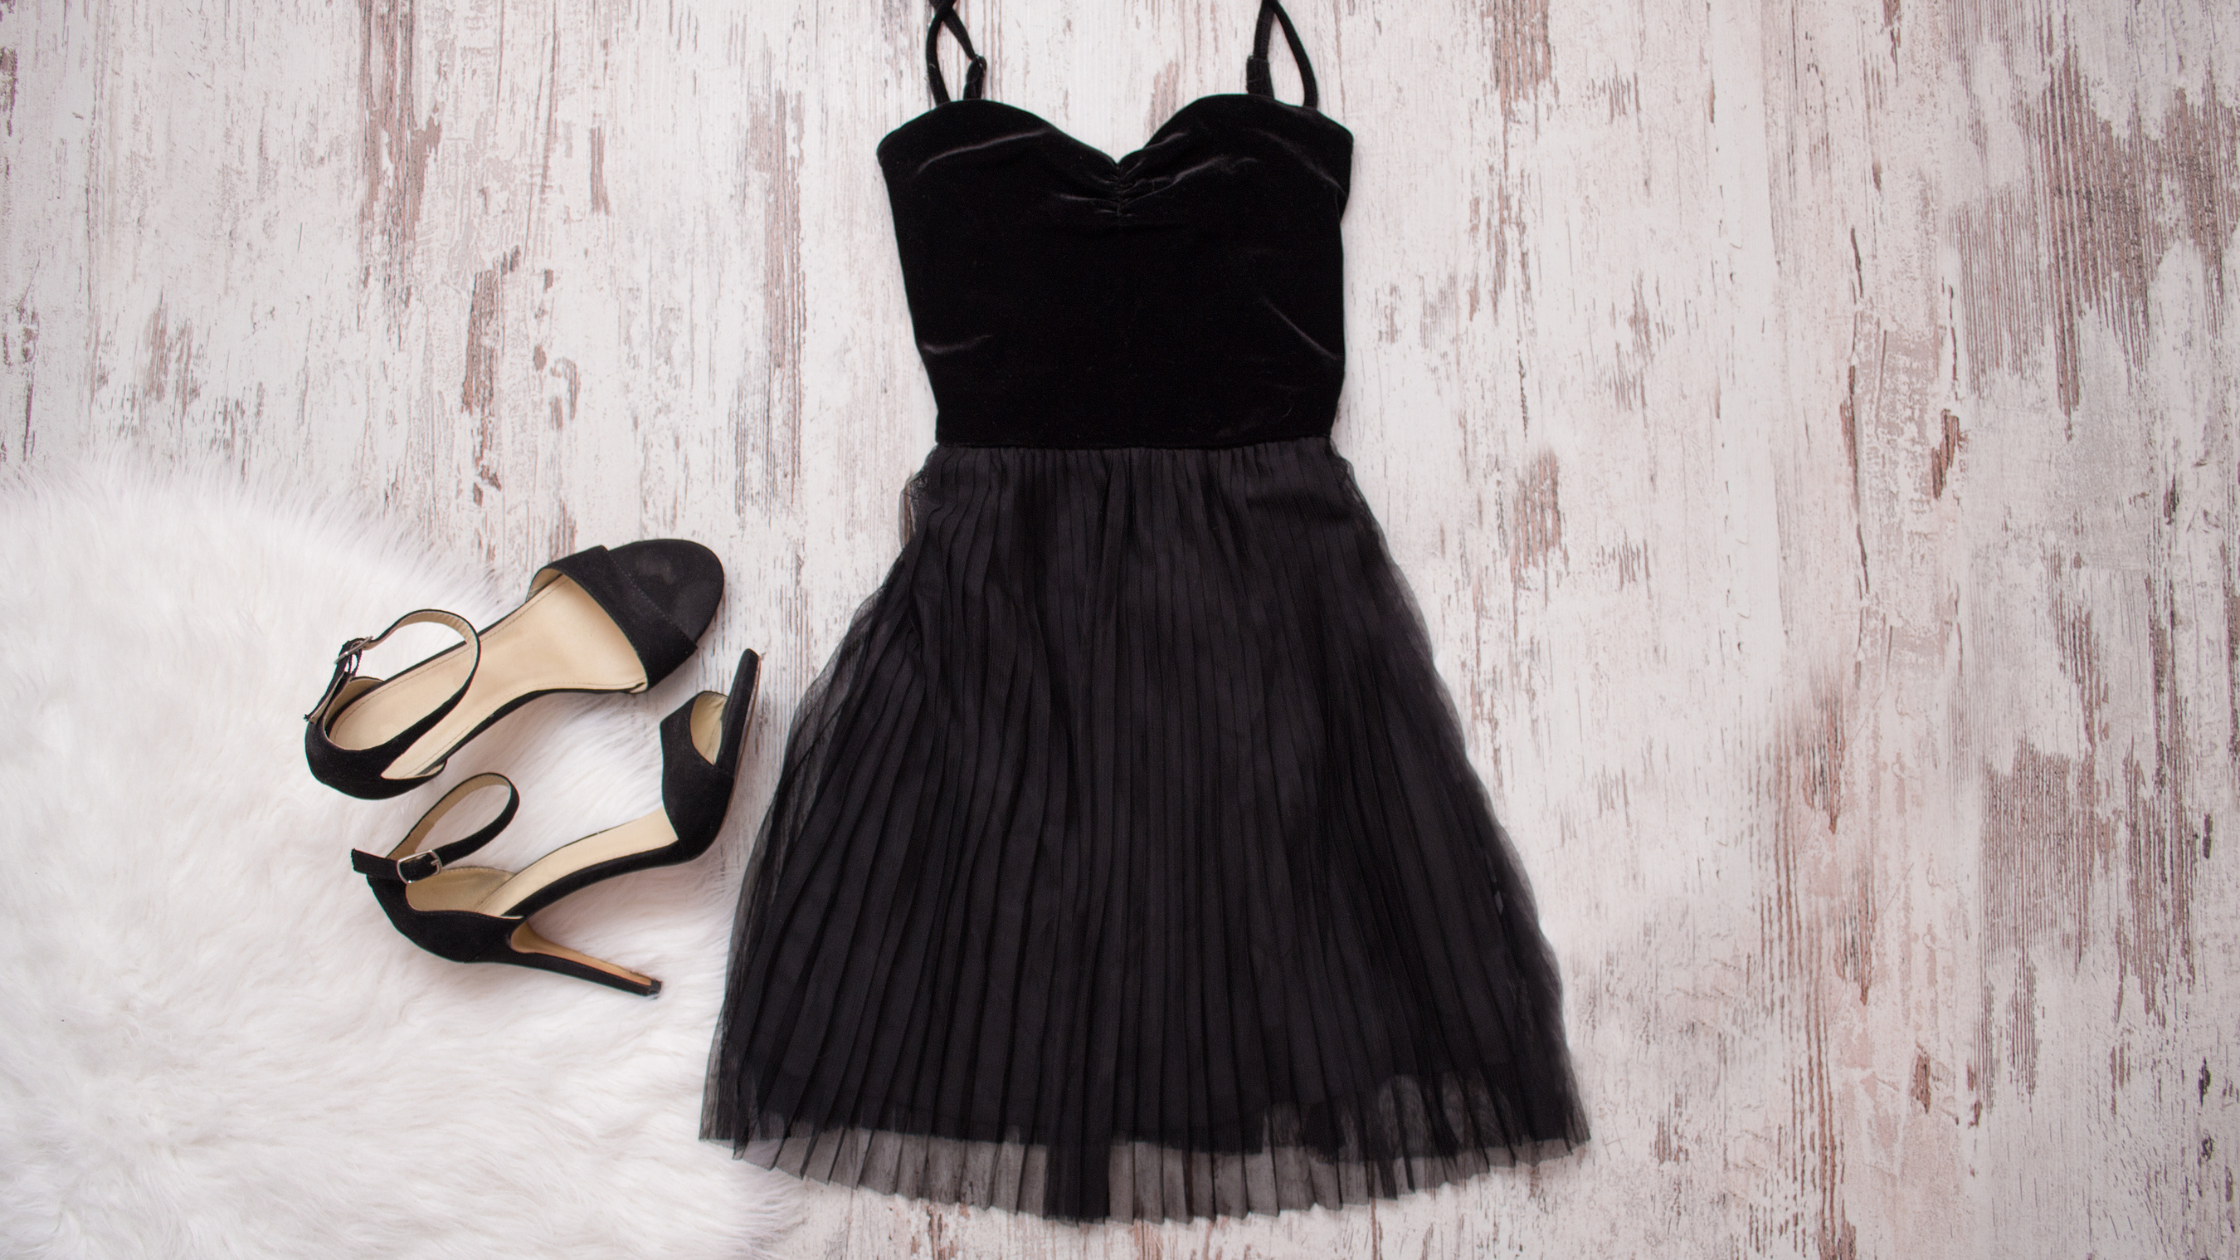 How To Accessorize A Black Dress For A Wedding